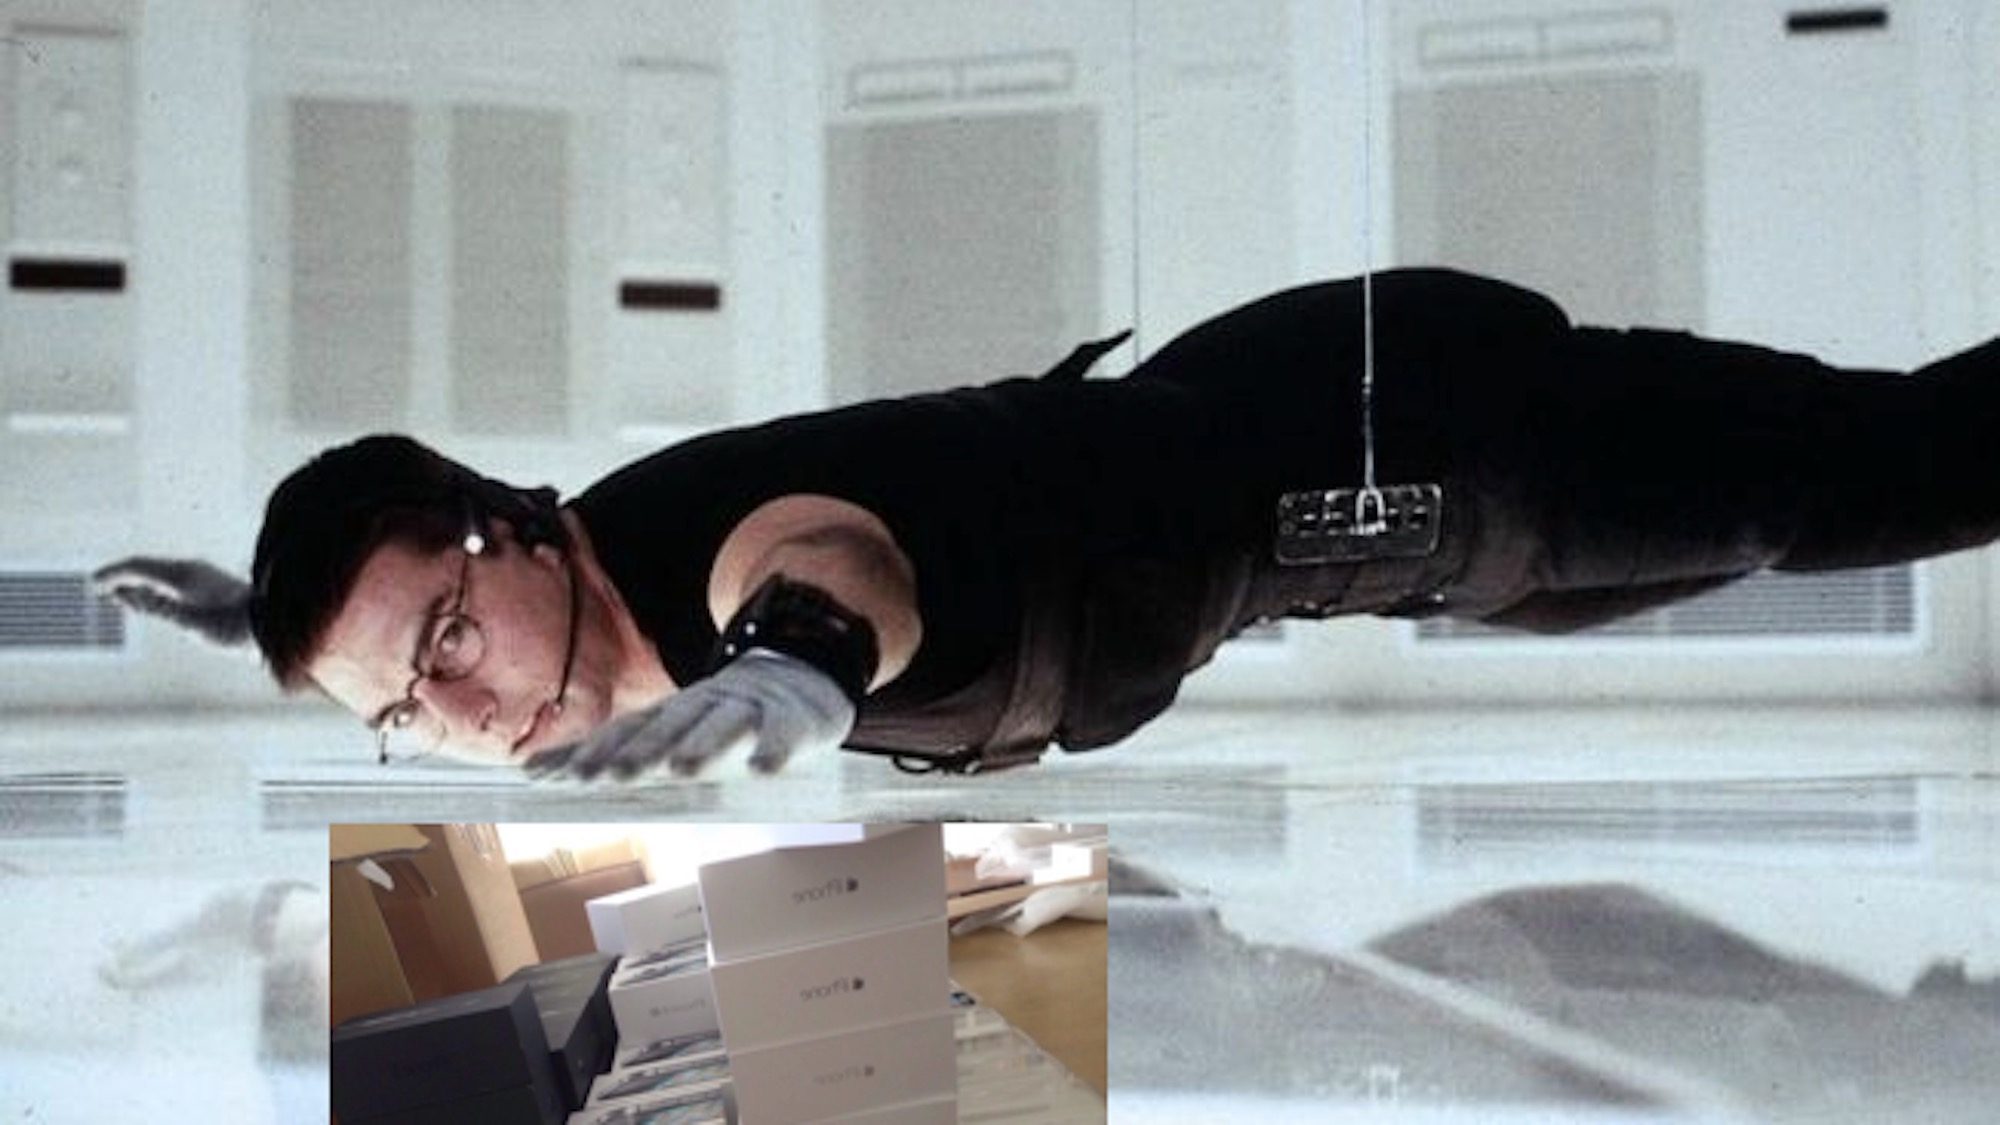 Thieves Make Off With $100k Worth of Apple Products After Rappelling Through Best Buy Roof